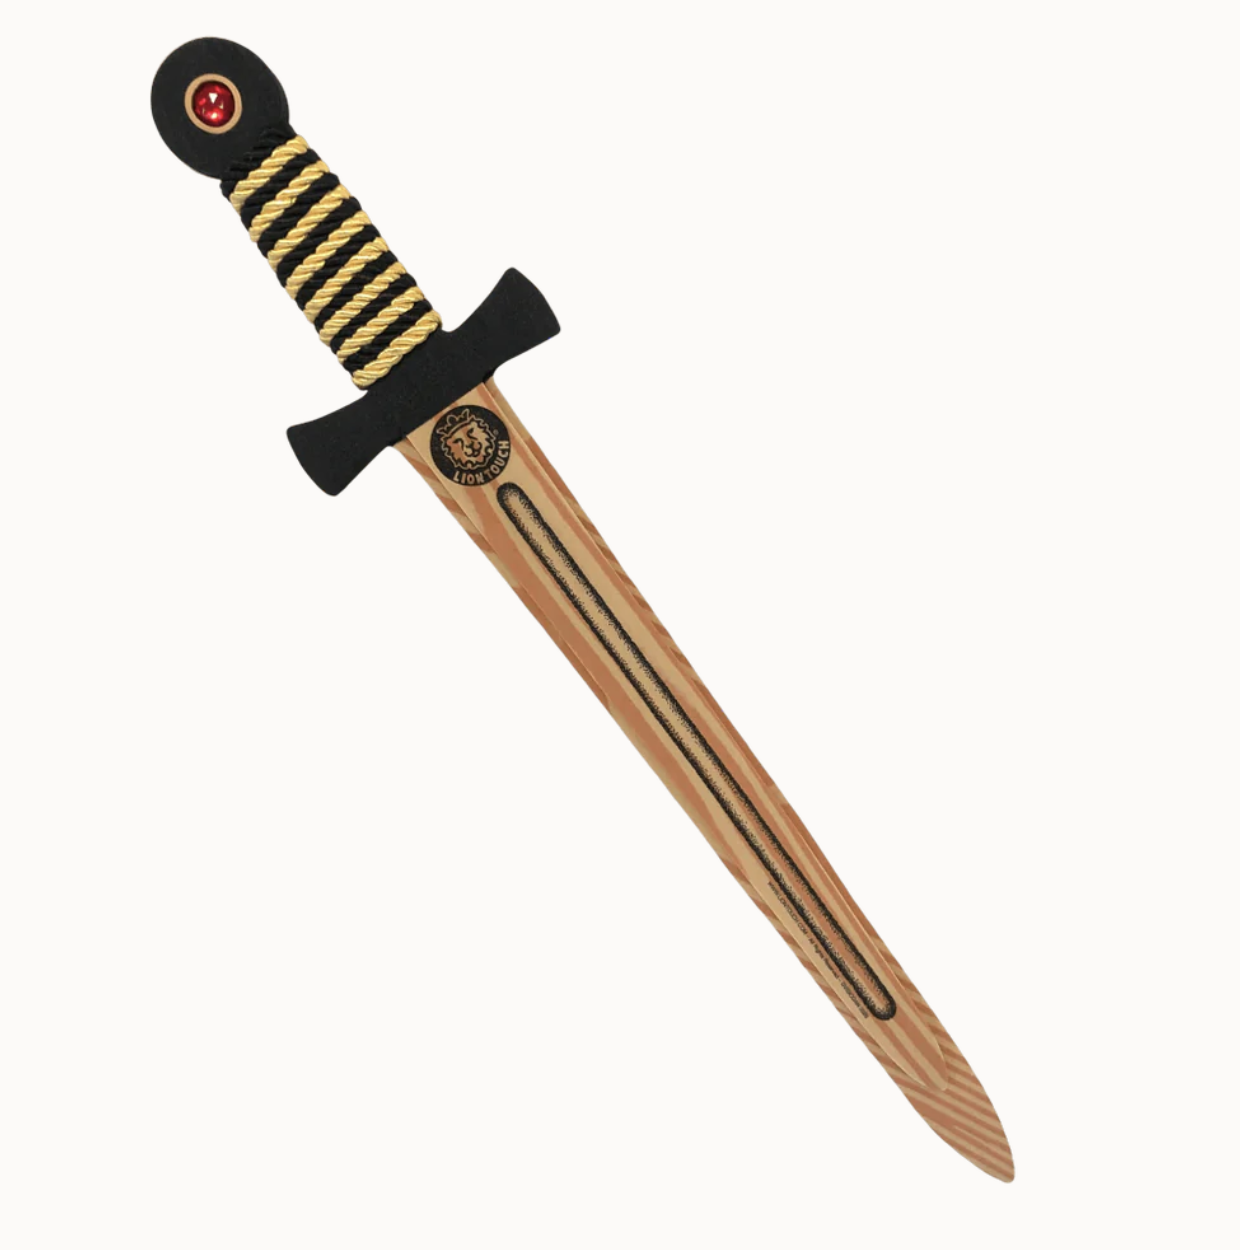 Woodylion "Wooden" Sword in Black and Gold